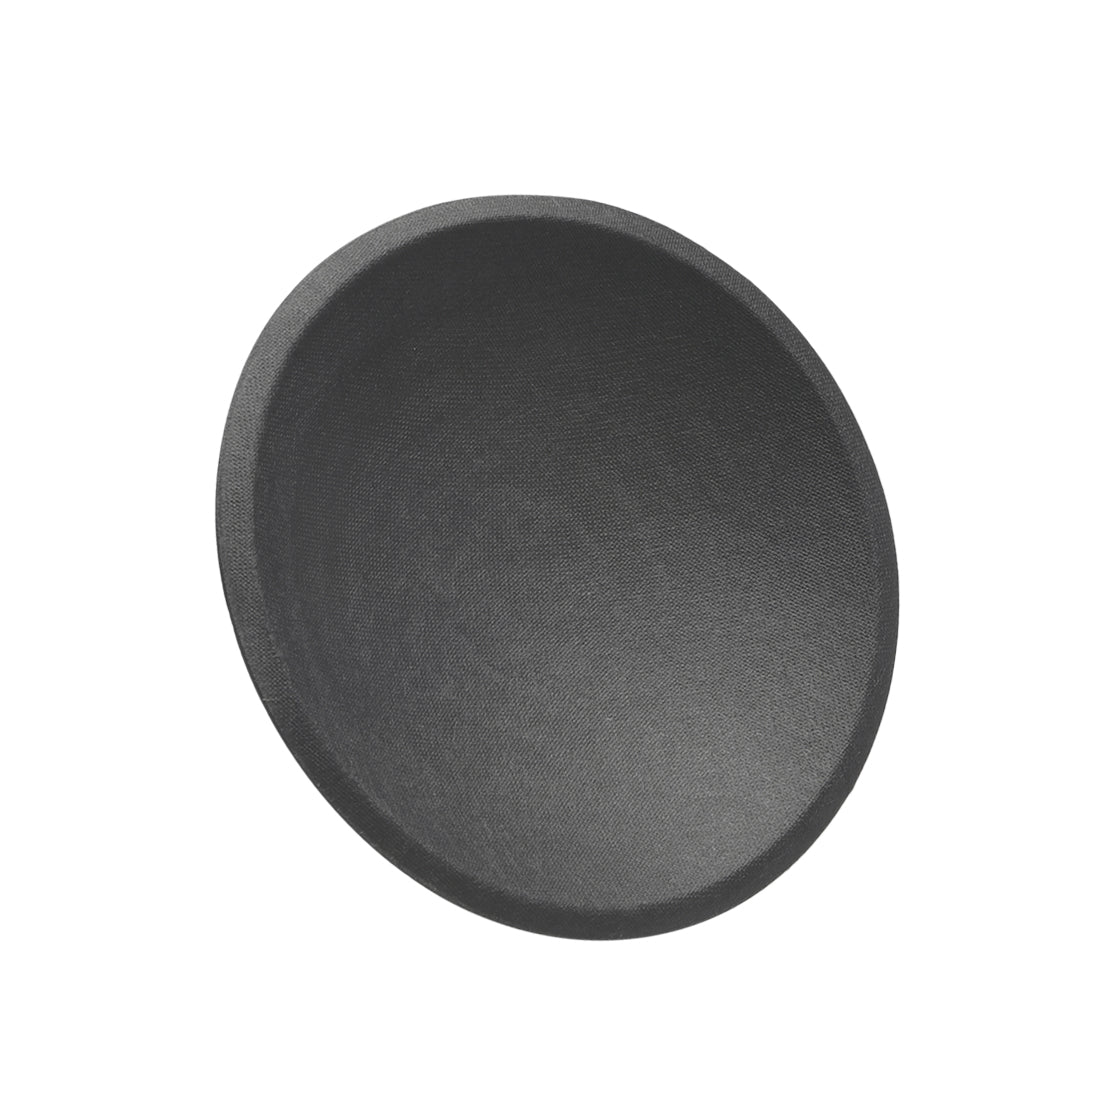 uxcell Uxcell Speaker Dust Cap 65mm/2.5" Diameter Subwoofer Paper Dome Coil Cover Caps